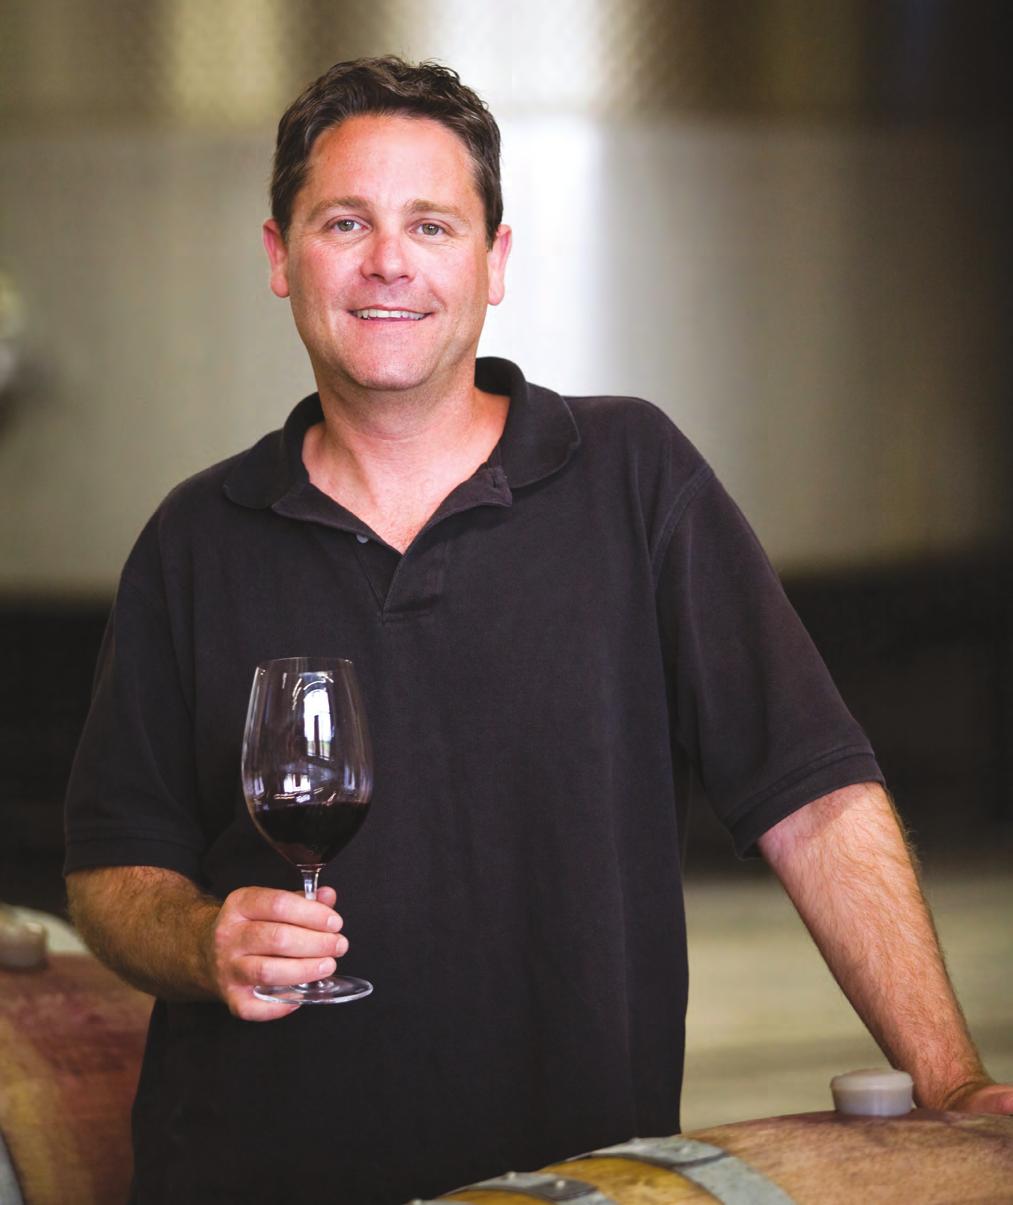 THE WINEMAKER At Waterbrook I strive to produce wonderfully structured wines with silky texture and harmonious balance that complement a variety of cuisines.